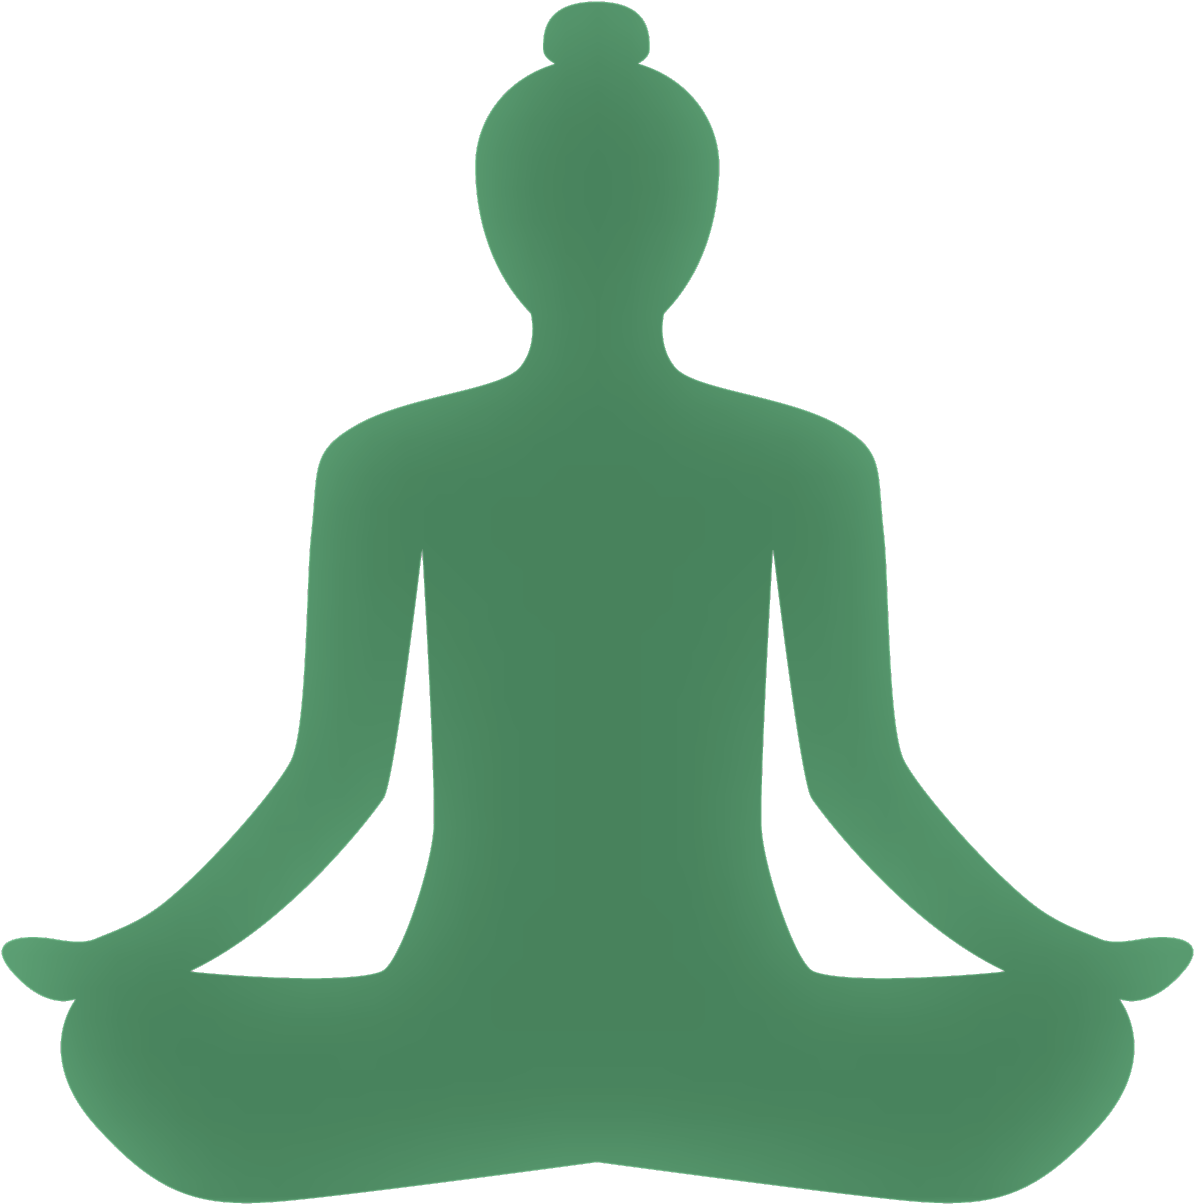 Download and share clipart about Transparent Meditation Clipart Gassho - Mi...